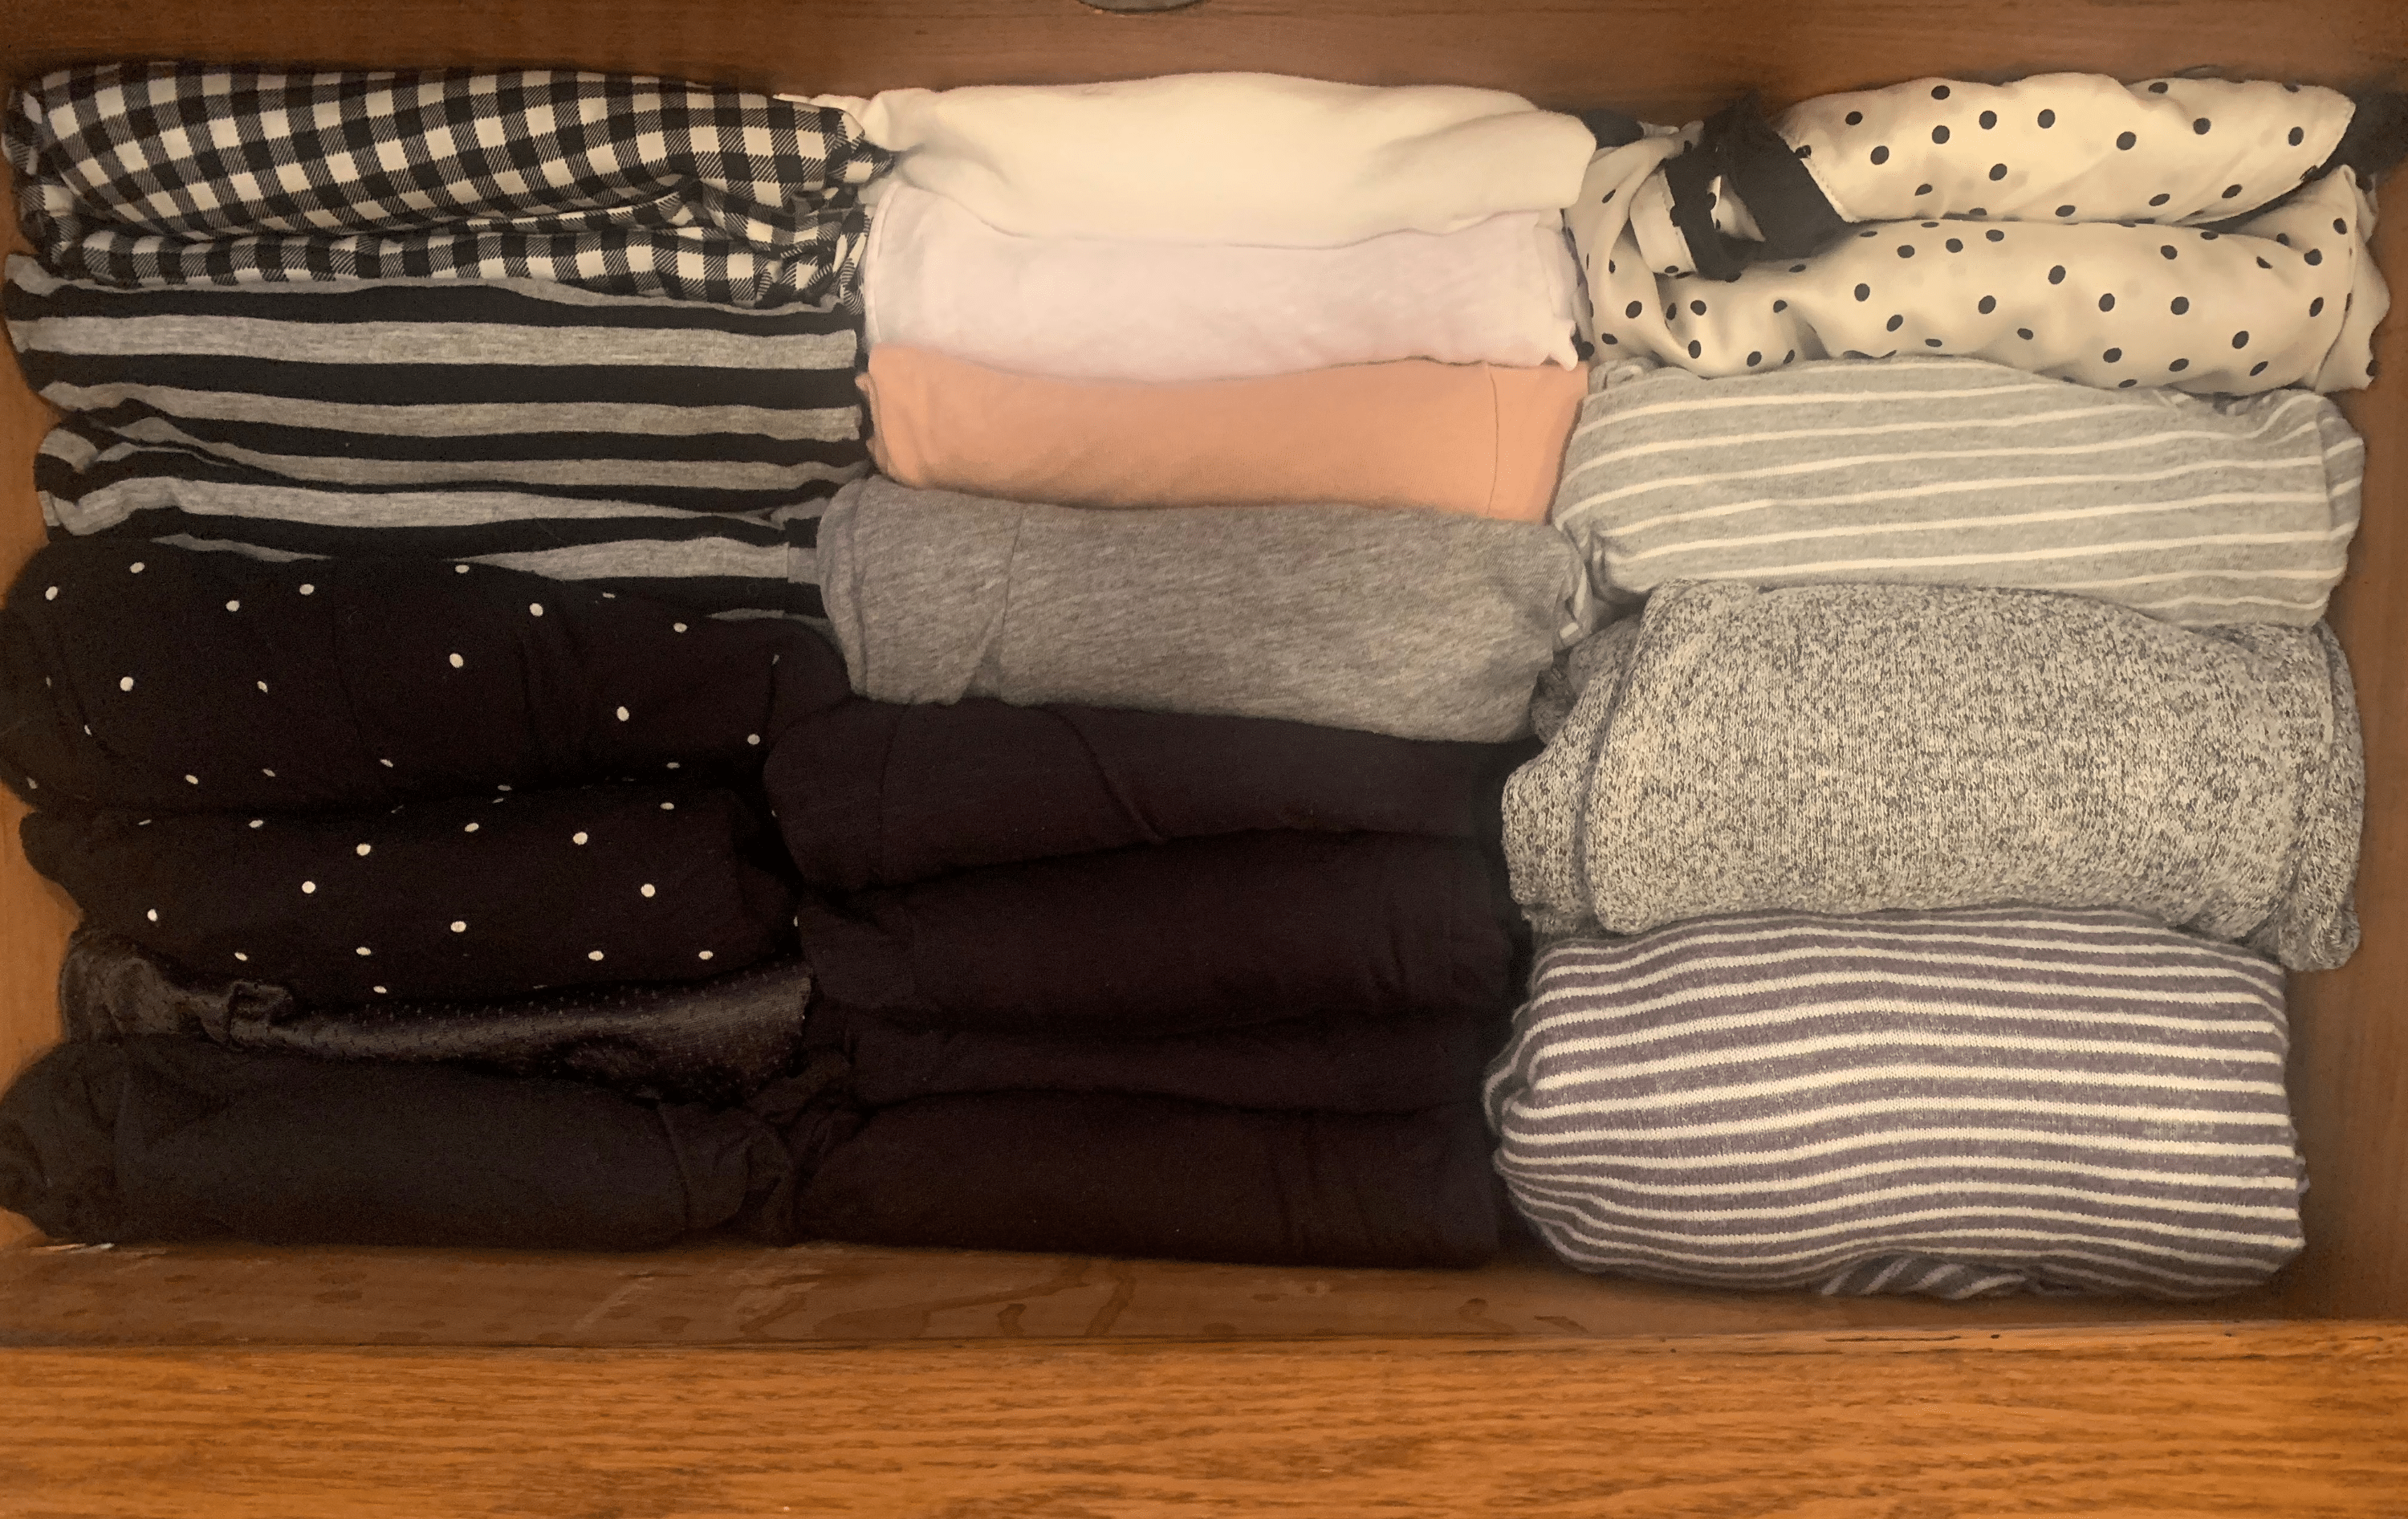 Organized drawer with neatly folded clothes